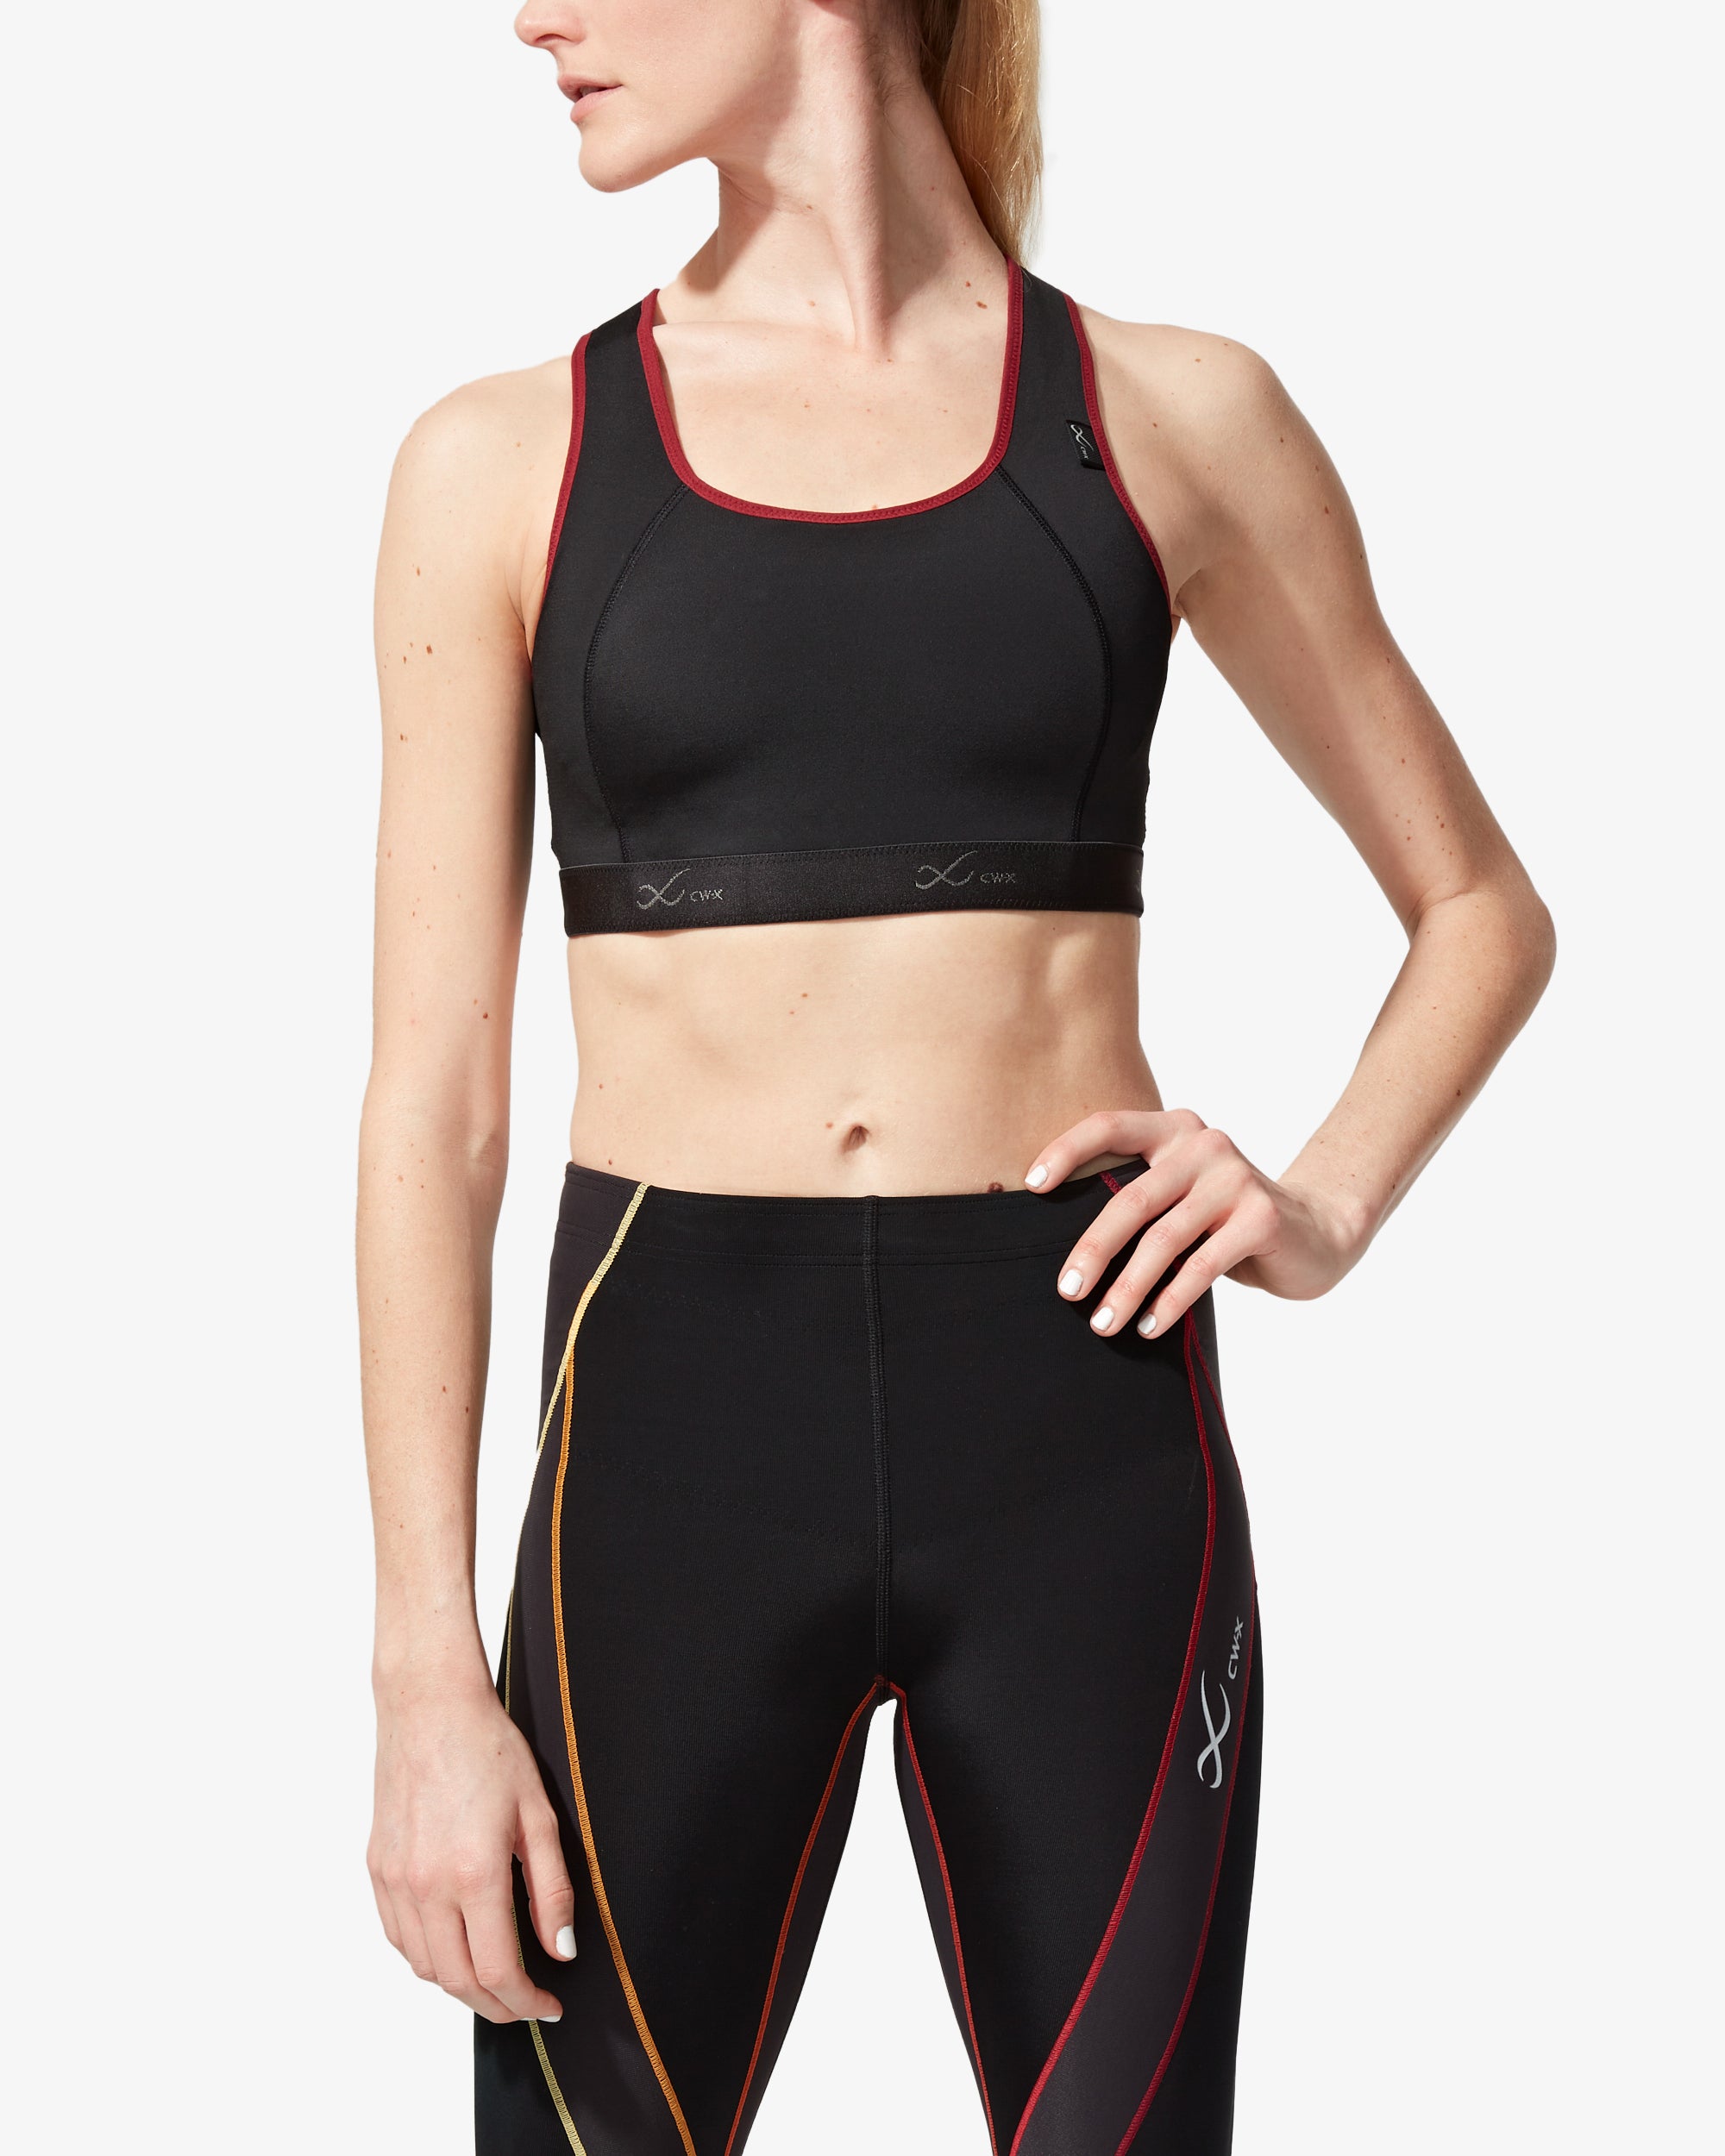 Xtra Support High Impact Sports Bra: Black/Rooibos